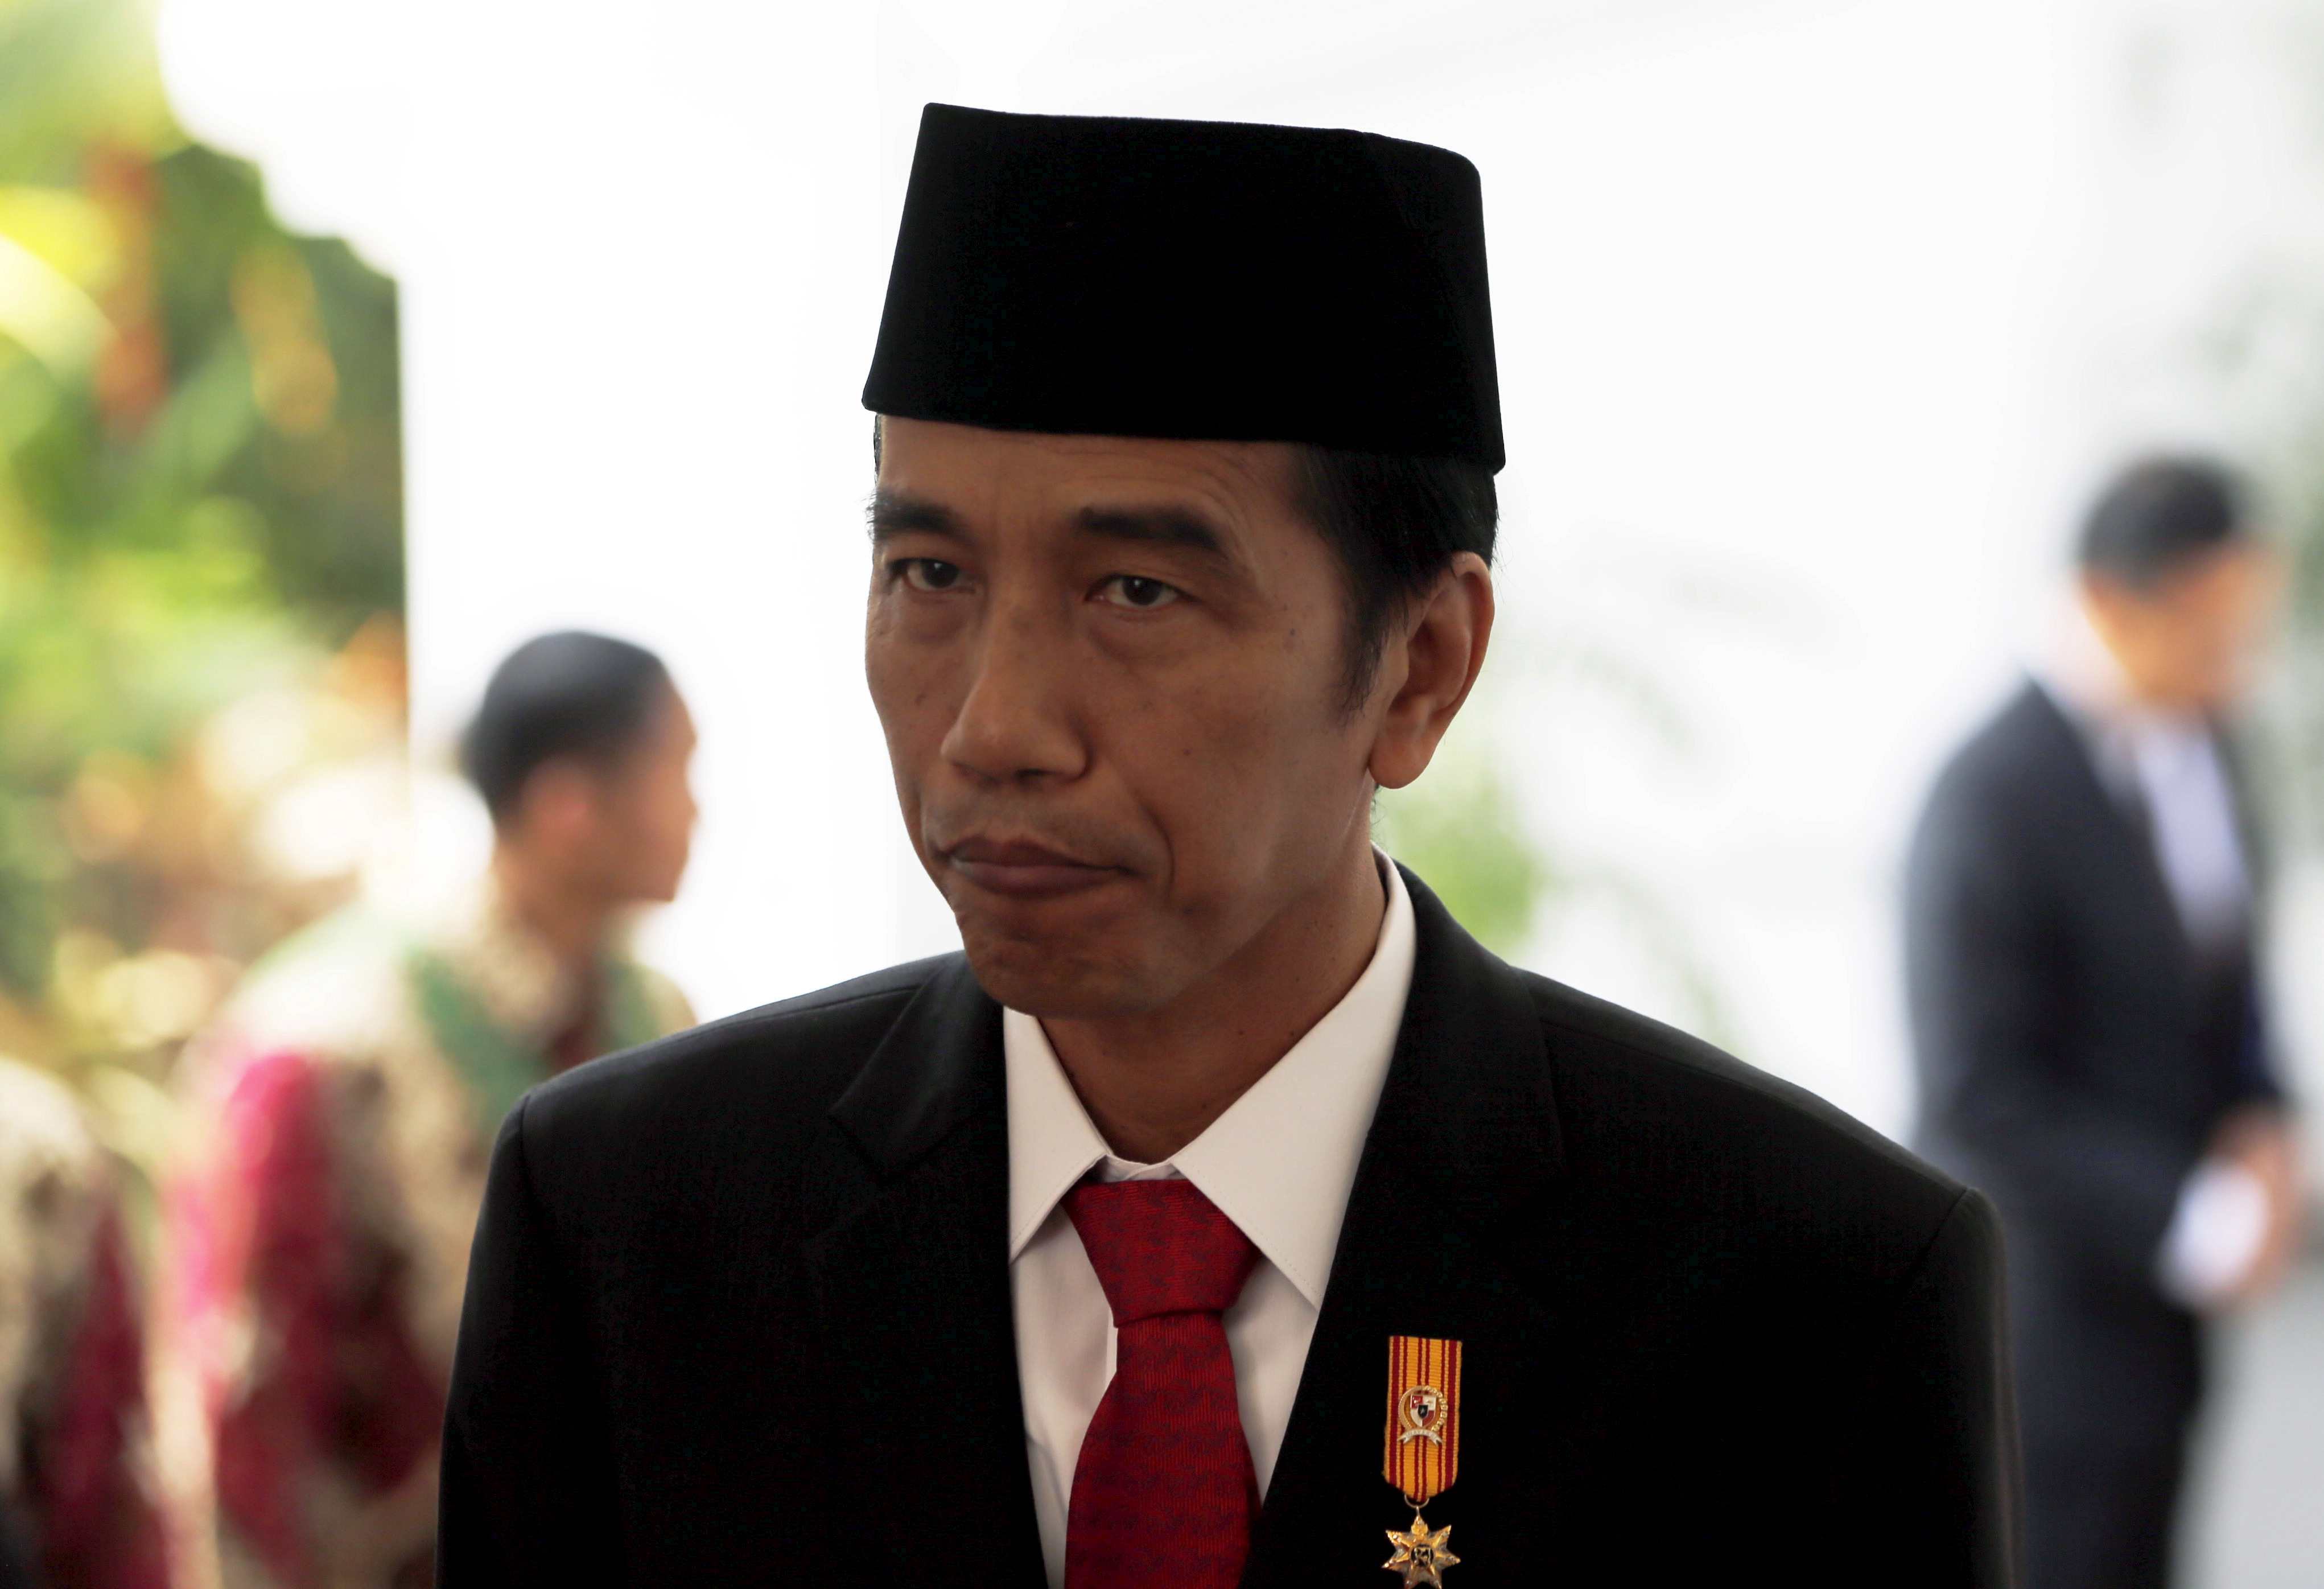 Indonesian President Joko Widodo is pictured after seeing off Danish Queen Margarethe at the presidential palace in Jakarta on Oct. 22, 2015 (Beawiharta Beawiharta—Reuters)